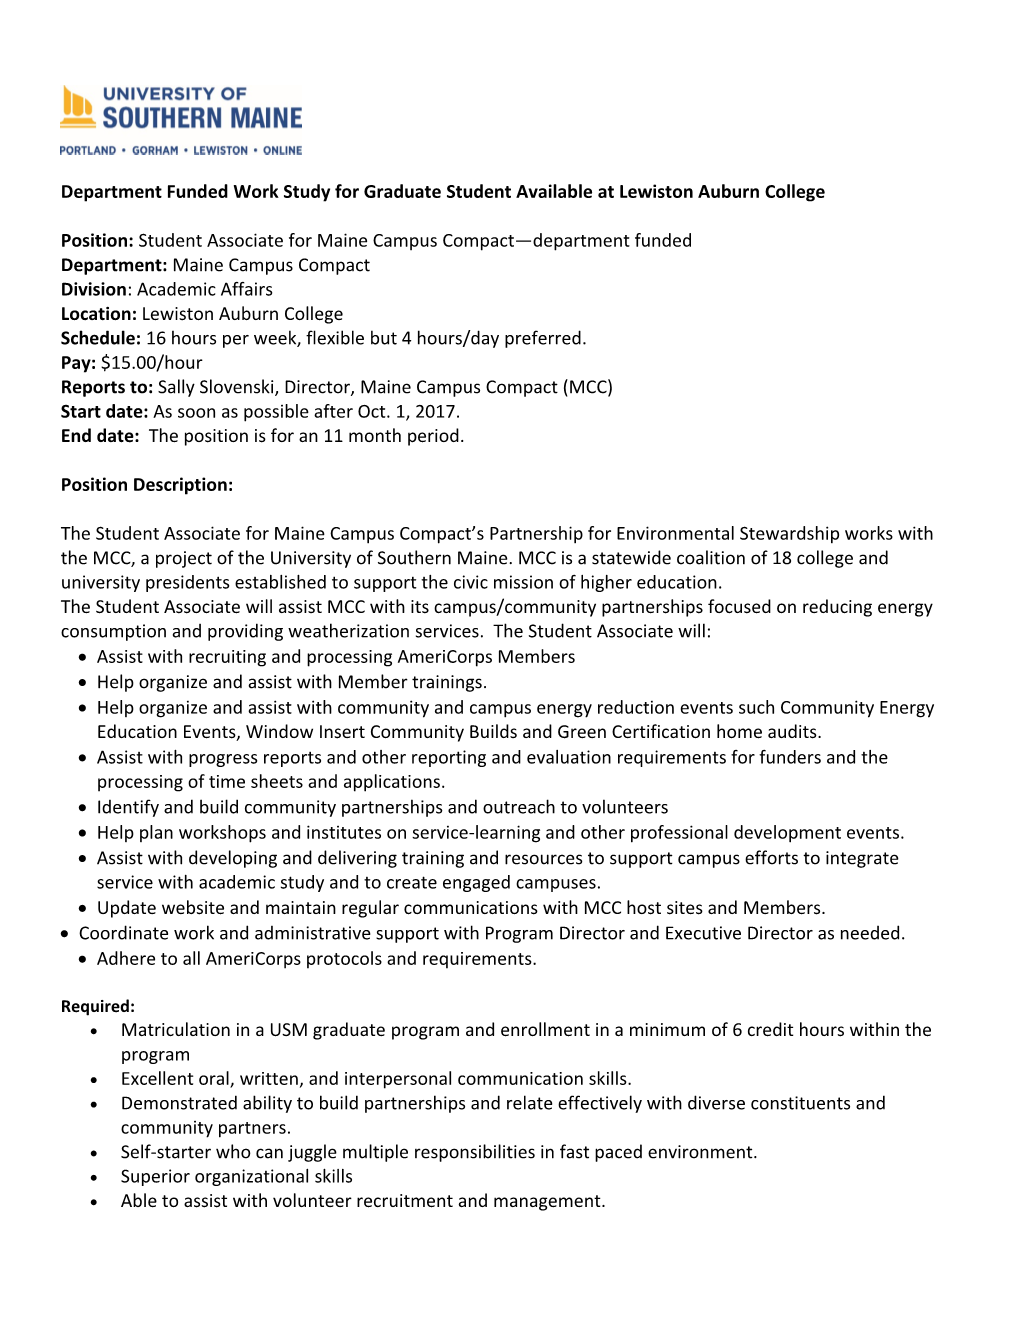 Department Funded Work Study for Graduate Student Available at Lewiston Auburn College